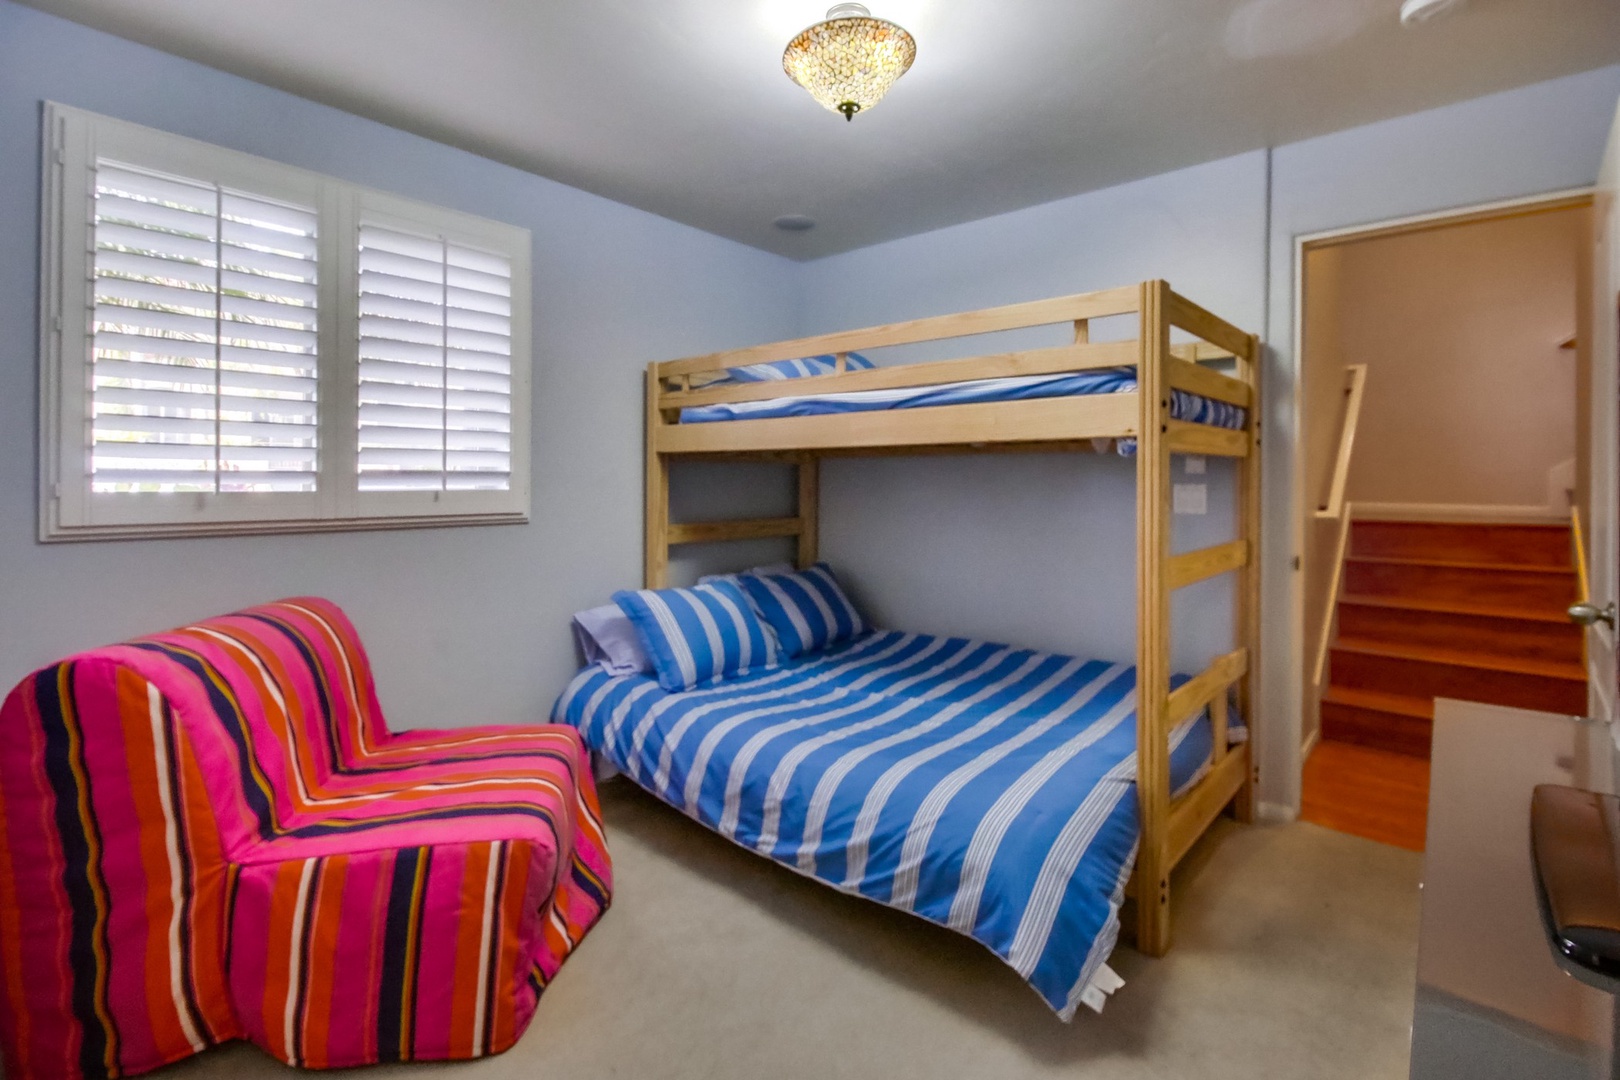 Bedroom 3 Full/twin bunk/futon with twin pull out chair